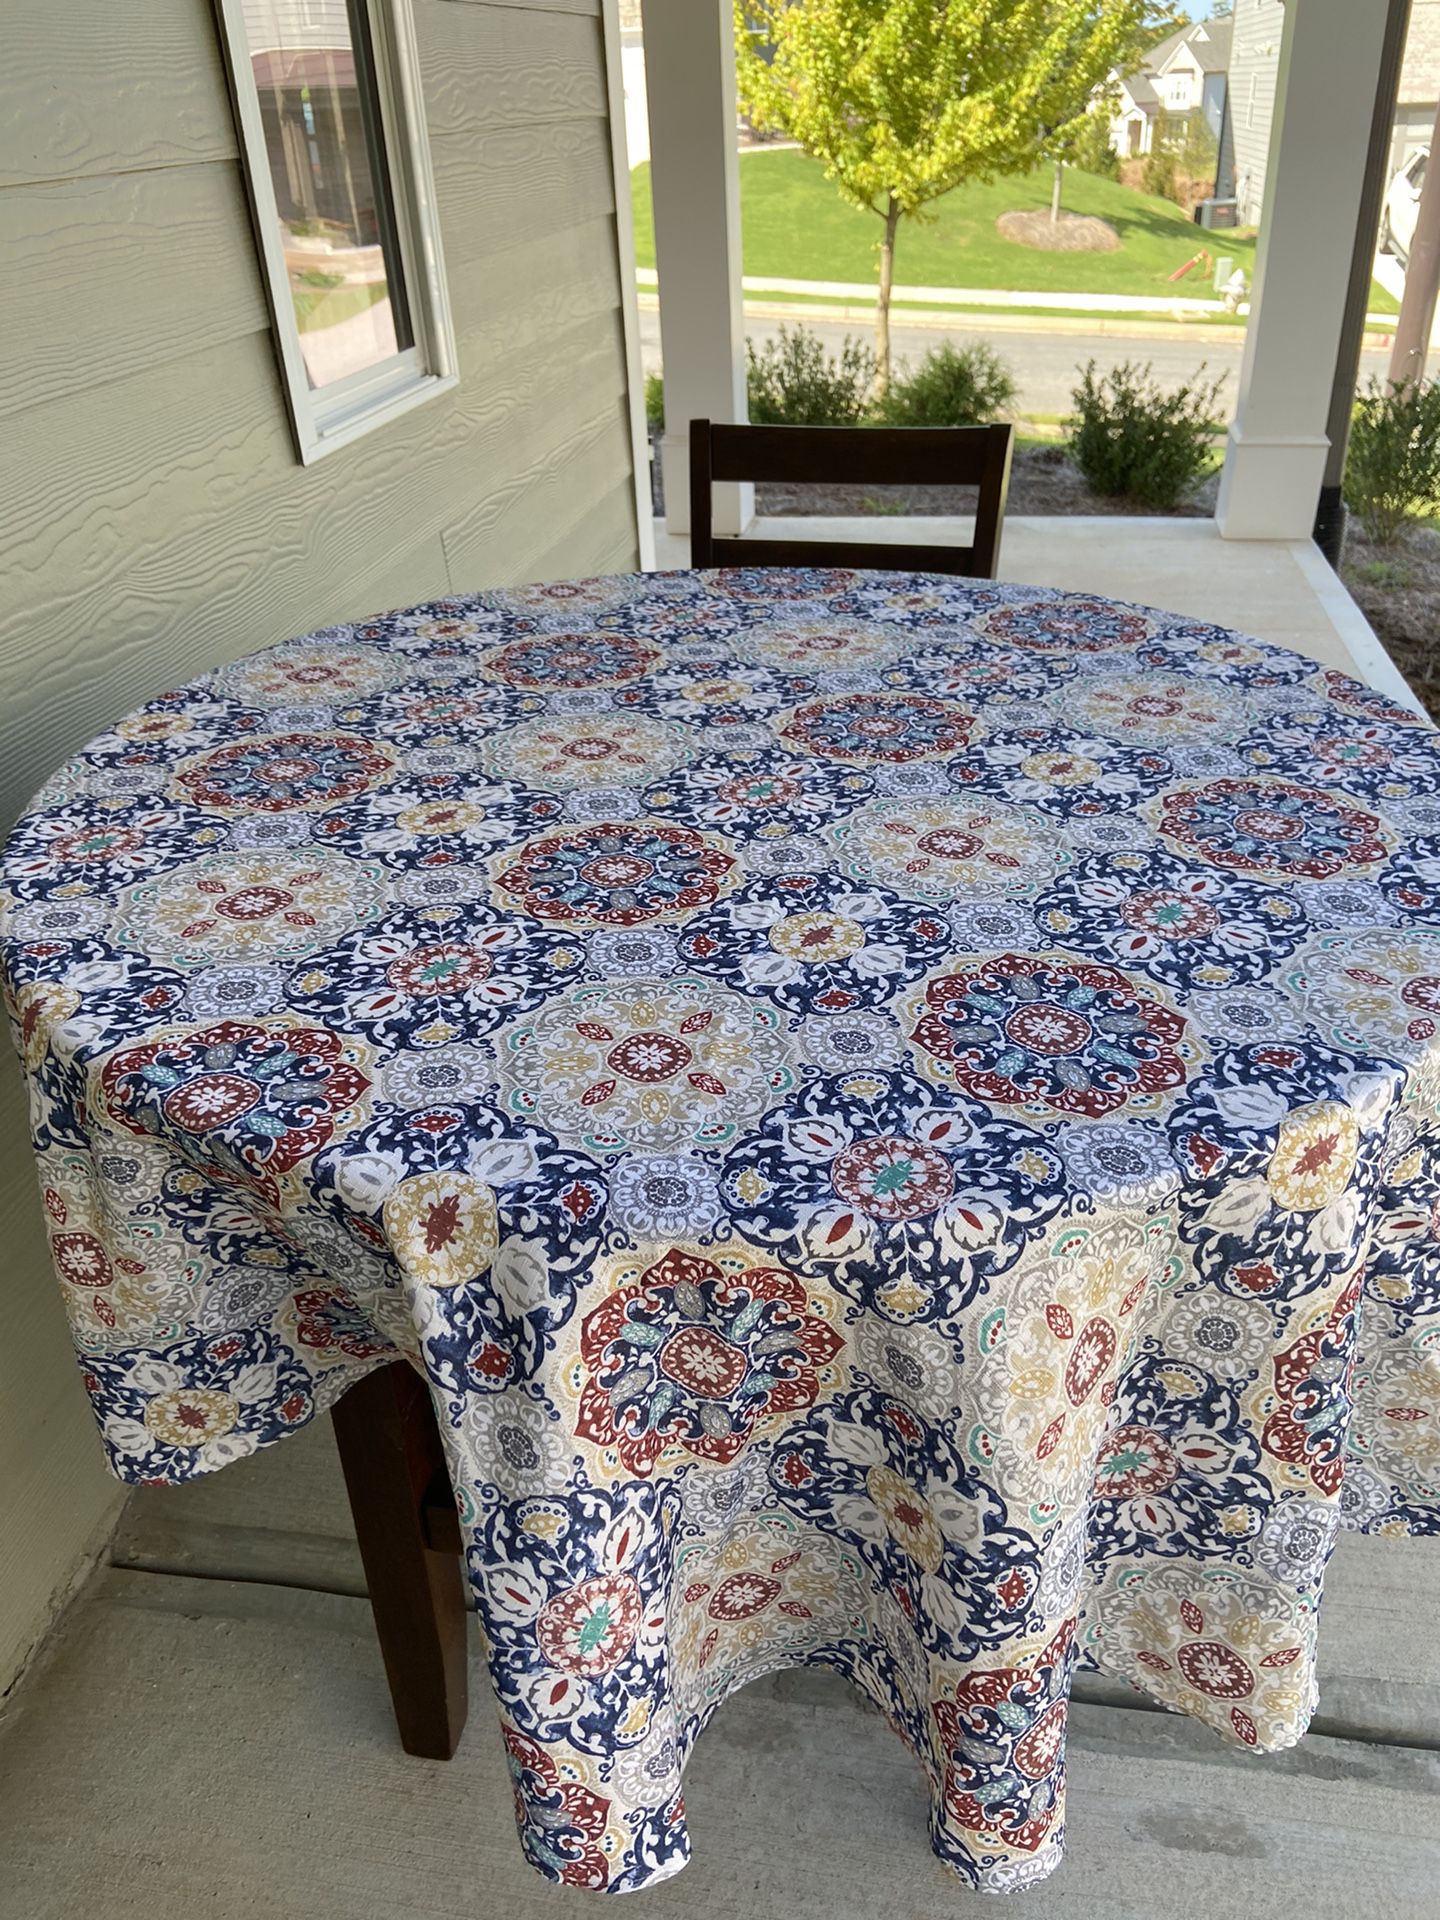 Round high breakfast table and 1 chair